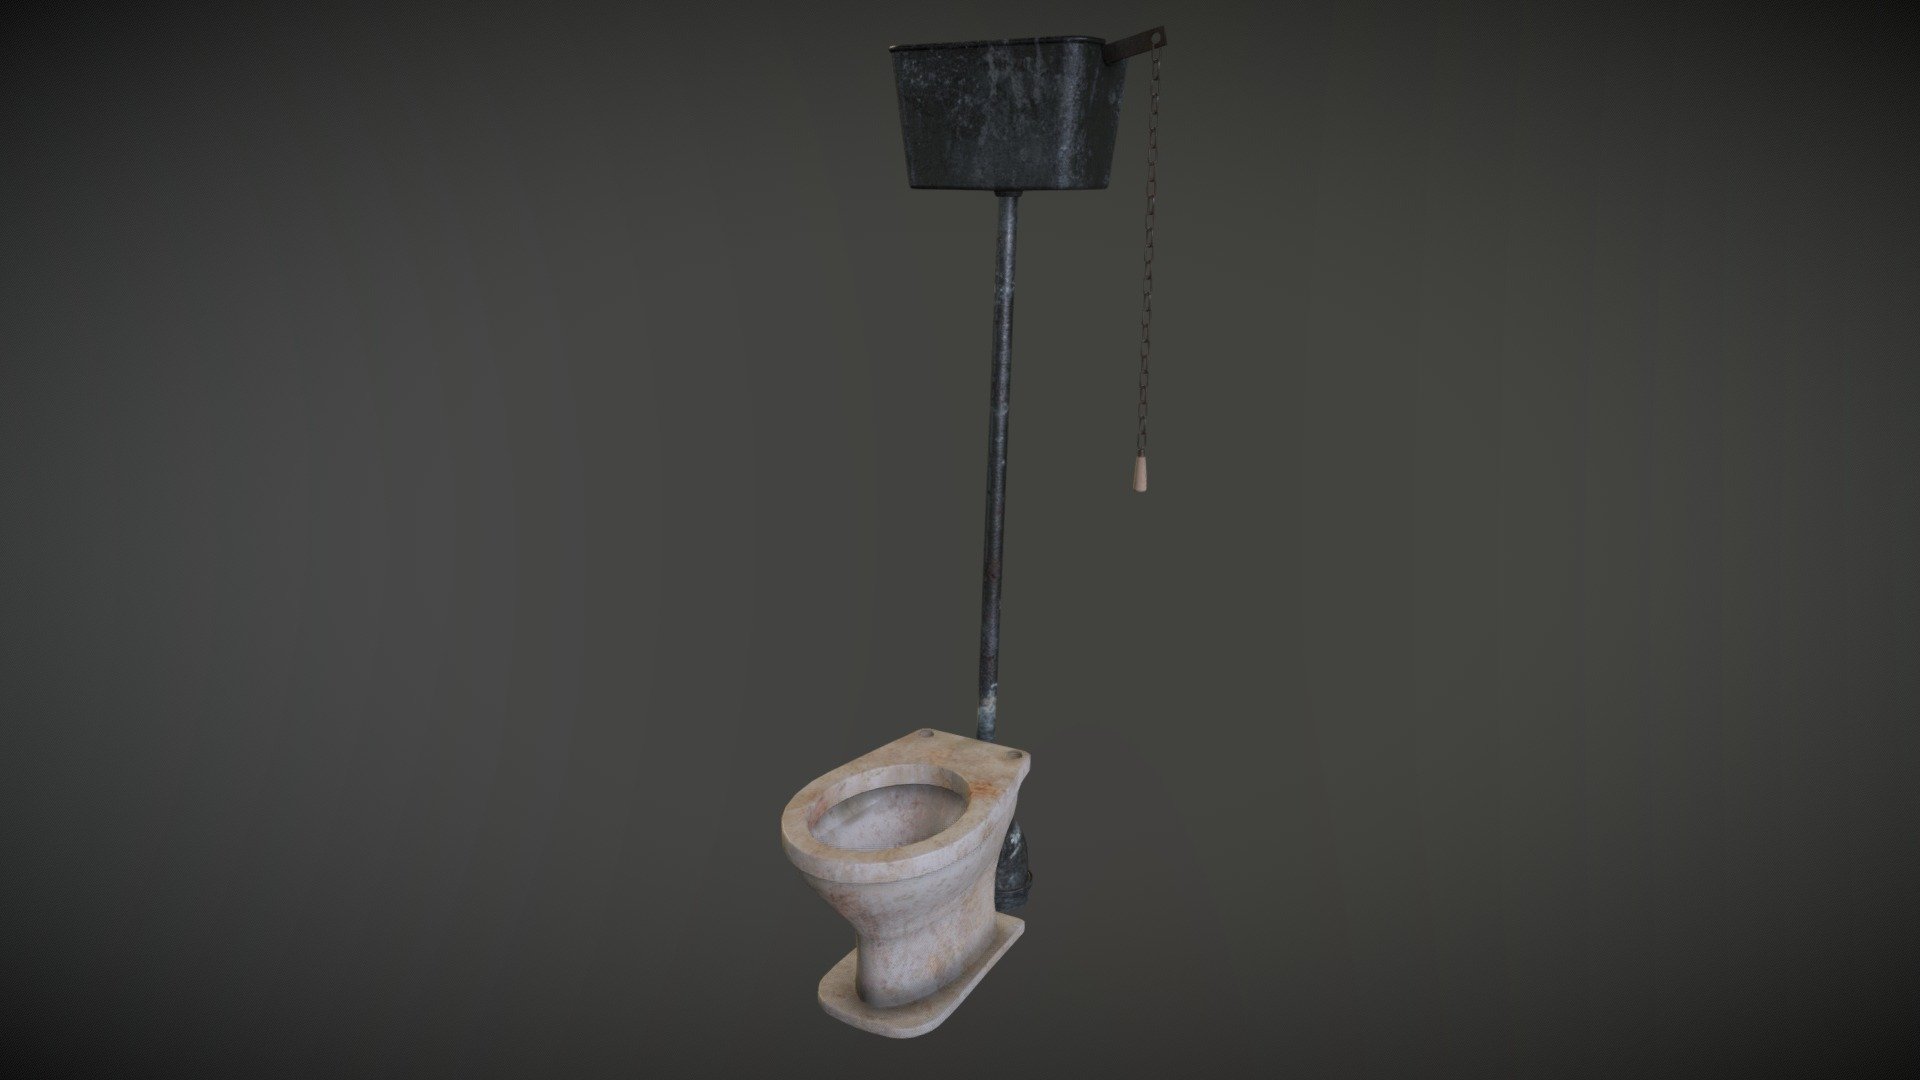 Game Art, Old Chain Toilet, Low Poly, PBR Maps

3ds Max, XNormal, Quixel Suite, Photoshop

The 3D Model has the shading build at vertex level. For this matter it should be imported in your 3D Software, Game Engine without smoothing groups.

For example in UE4 - Import Normals and Tangents

Enjoy! - Game Art: Old Chain Toilet - Buy Royalty Free 3D model by Alex Filip (@filip.alecsandru) 3d model